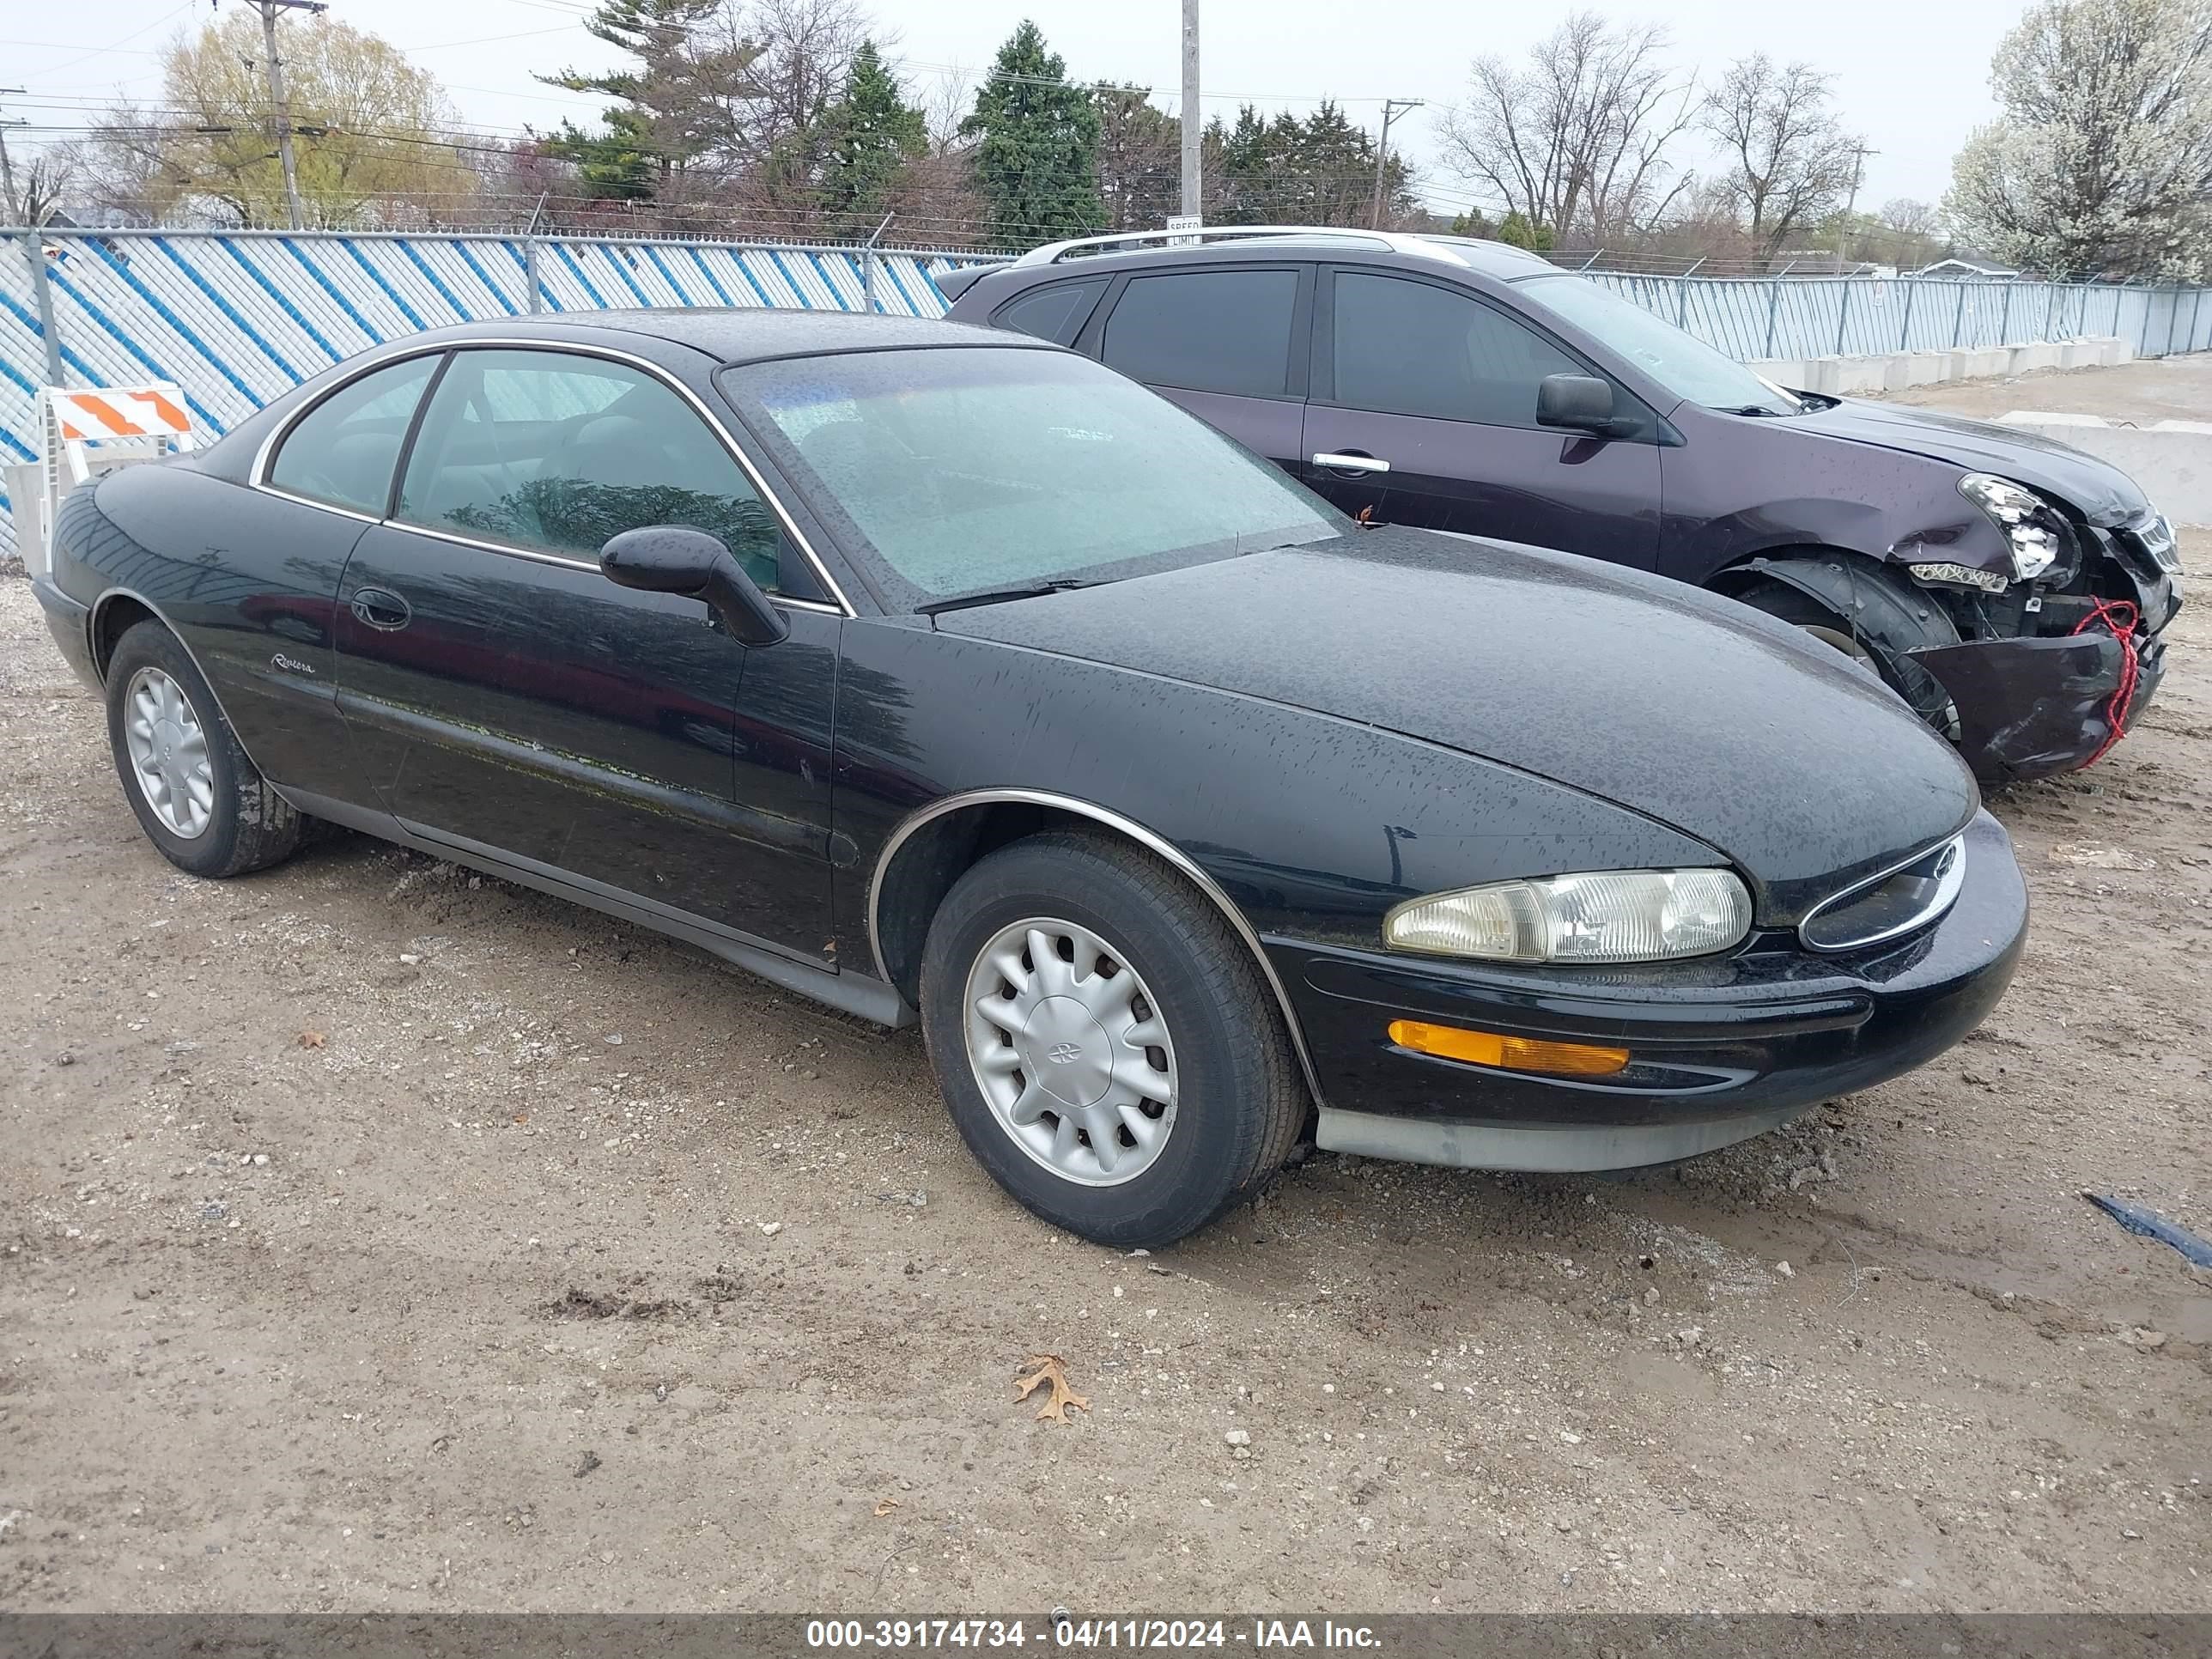 vin: 1G4GD2215S4709759 1G4GD2215S4709759 1995 buick riviera 3800 for Sale in 60428, 16425 Crawford Ave, Markham, Illinois, USA